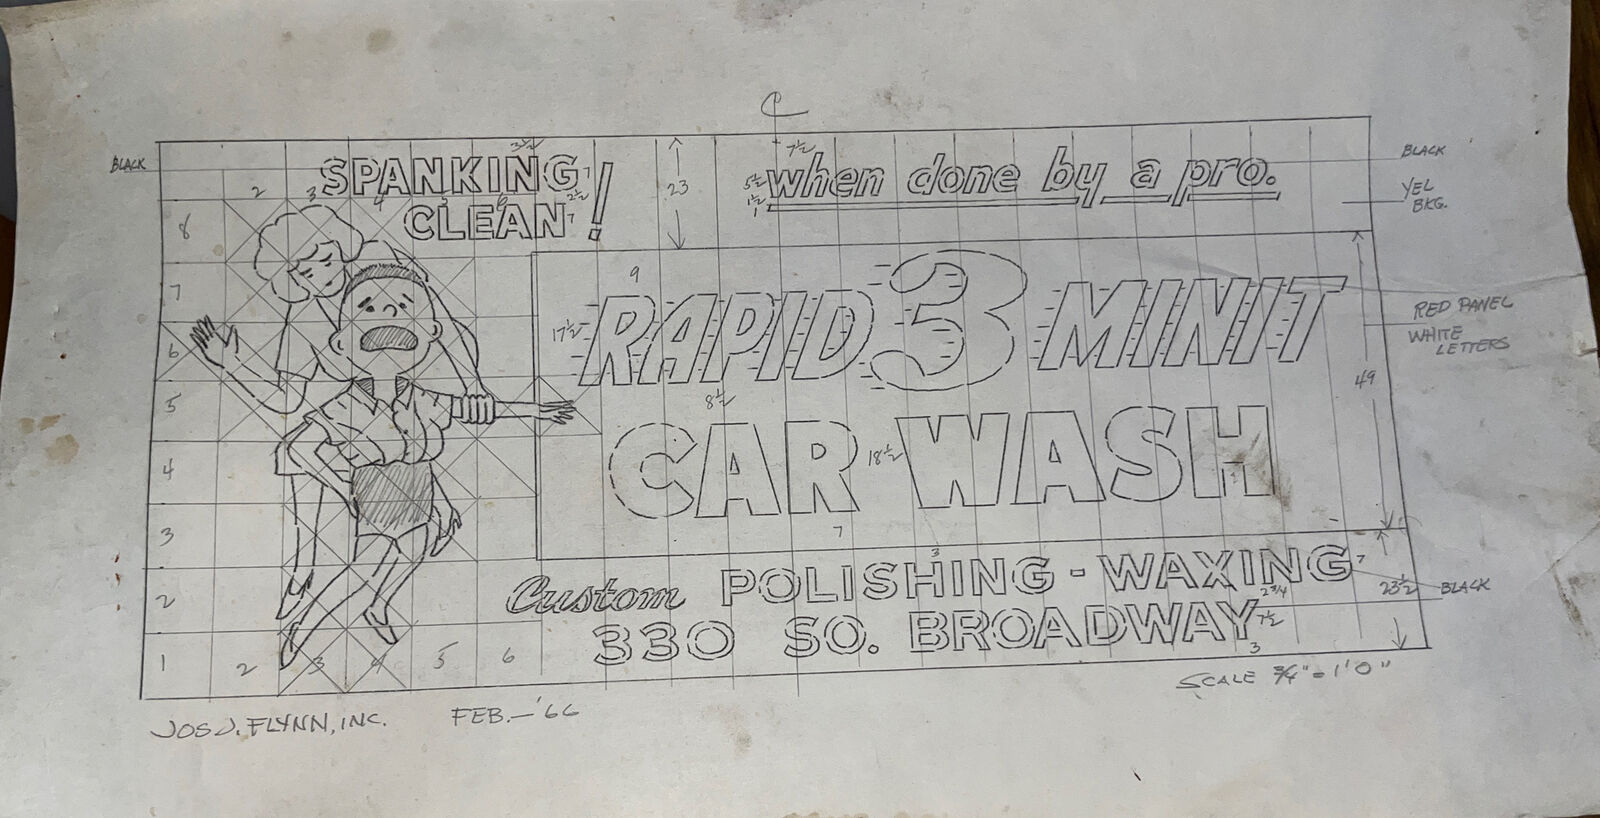 Vintage 1966 Naughty Spanking Billboard Outdoor Sign Ad Sketch for Car Wash